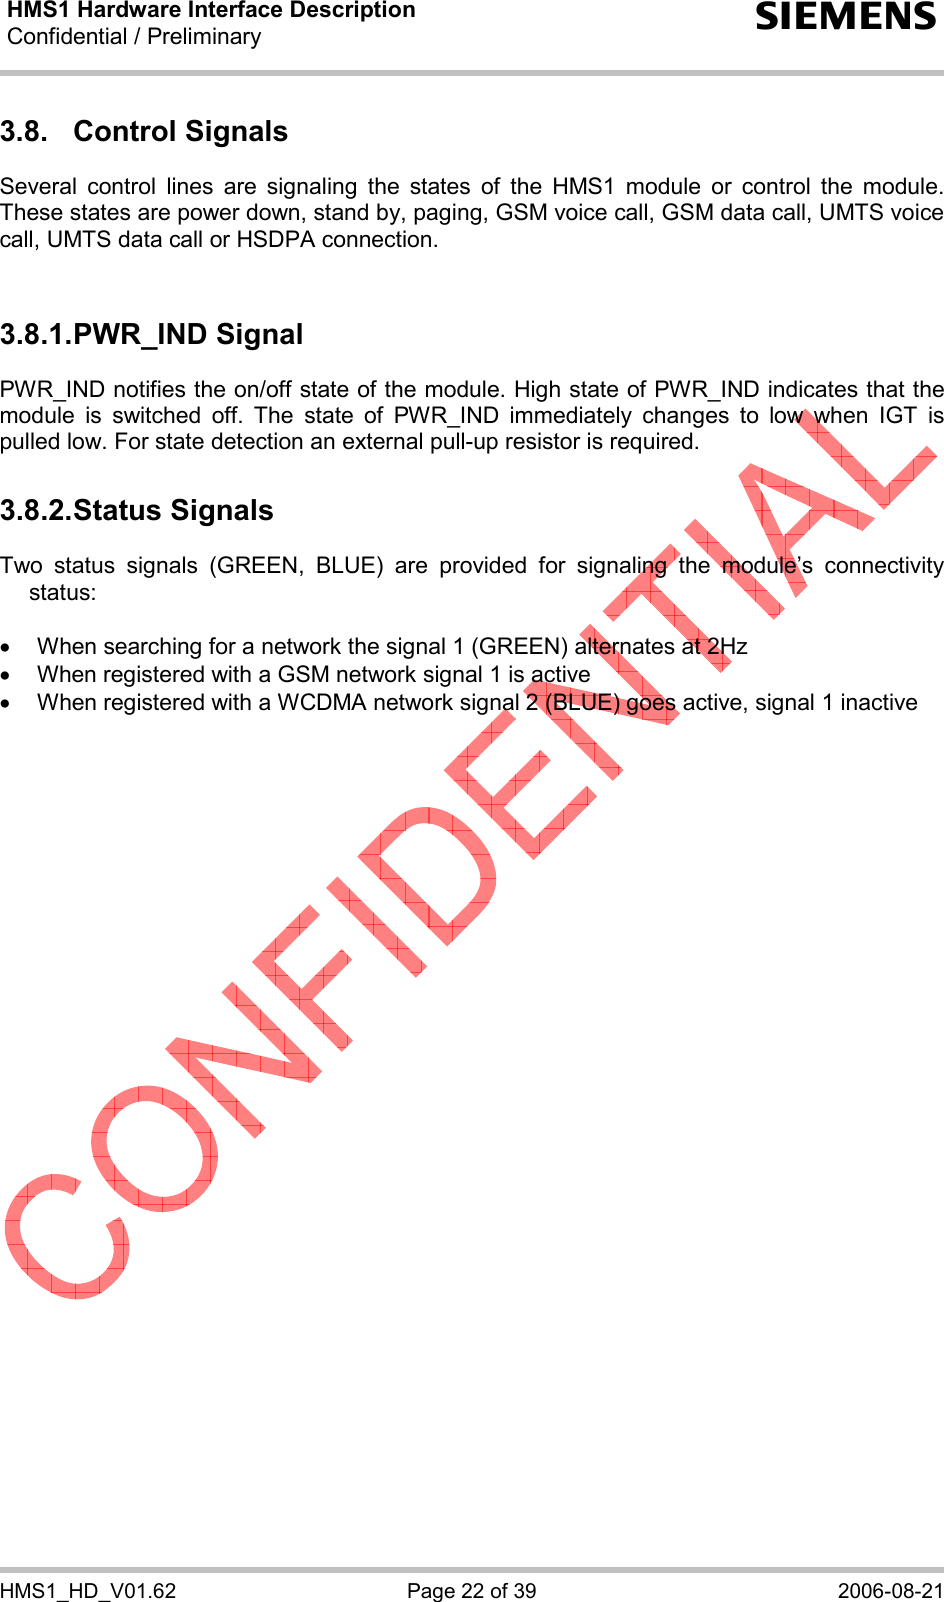 HMS1 Hardware Interface Description Confidential / Preliminary  s HMS1_HD_V01.62  Page 22 of 39  2006-08-21 3.8.  Control Signals  Several control lines are signaling the states of the HMS1 module or control the module. These states are power down, stand by, paging, GSM voice call, GSM data call, UMTS voice call, UMTS data call or HSDPA connection.   3.8.1. PWR_IND Signal PWR_IND notifies the on/off state of the module. High state of PWR_IND indicates that the module is switched off. The state of PWR_IND immediately changes to low when IGT is pulled low. For state detection an external pull-up resistor is required.  3.8.2. Status Signals Two status signals (GREEN, BLUE) are provided for signaling the module’s connectivity status:  •  When searching for a network the signal 1 (GREEN) alternates at 2Hz •  When registered with a GSM network signal 1 is active •  When registered with a WCDMA network signal 2 (BLUE) goes active, signal 1 inactive  